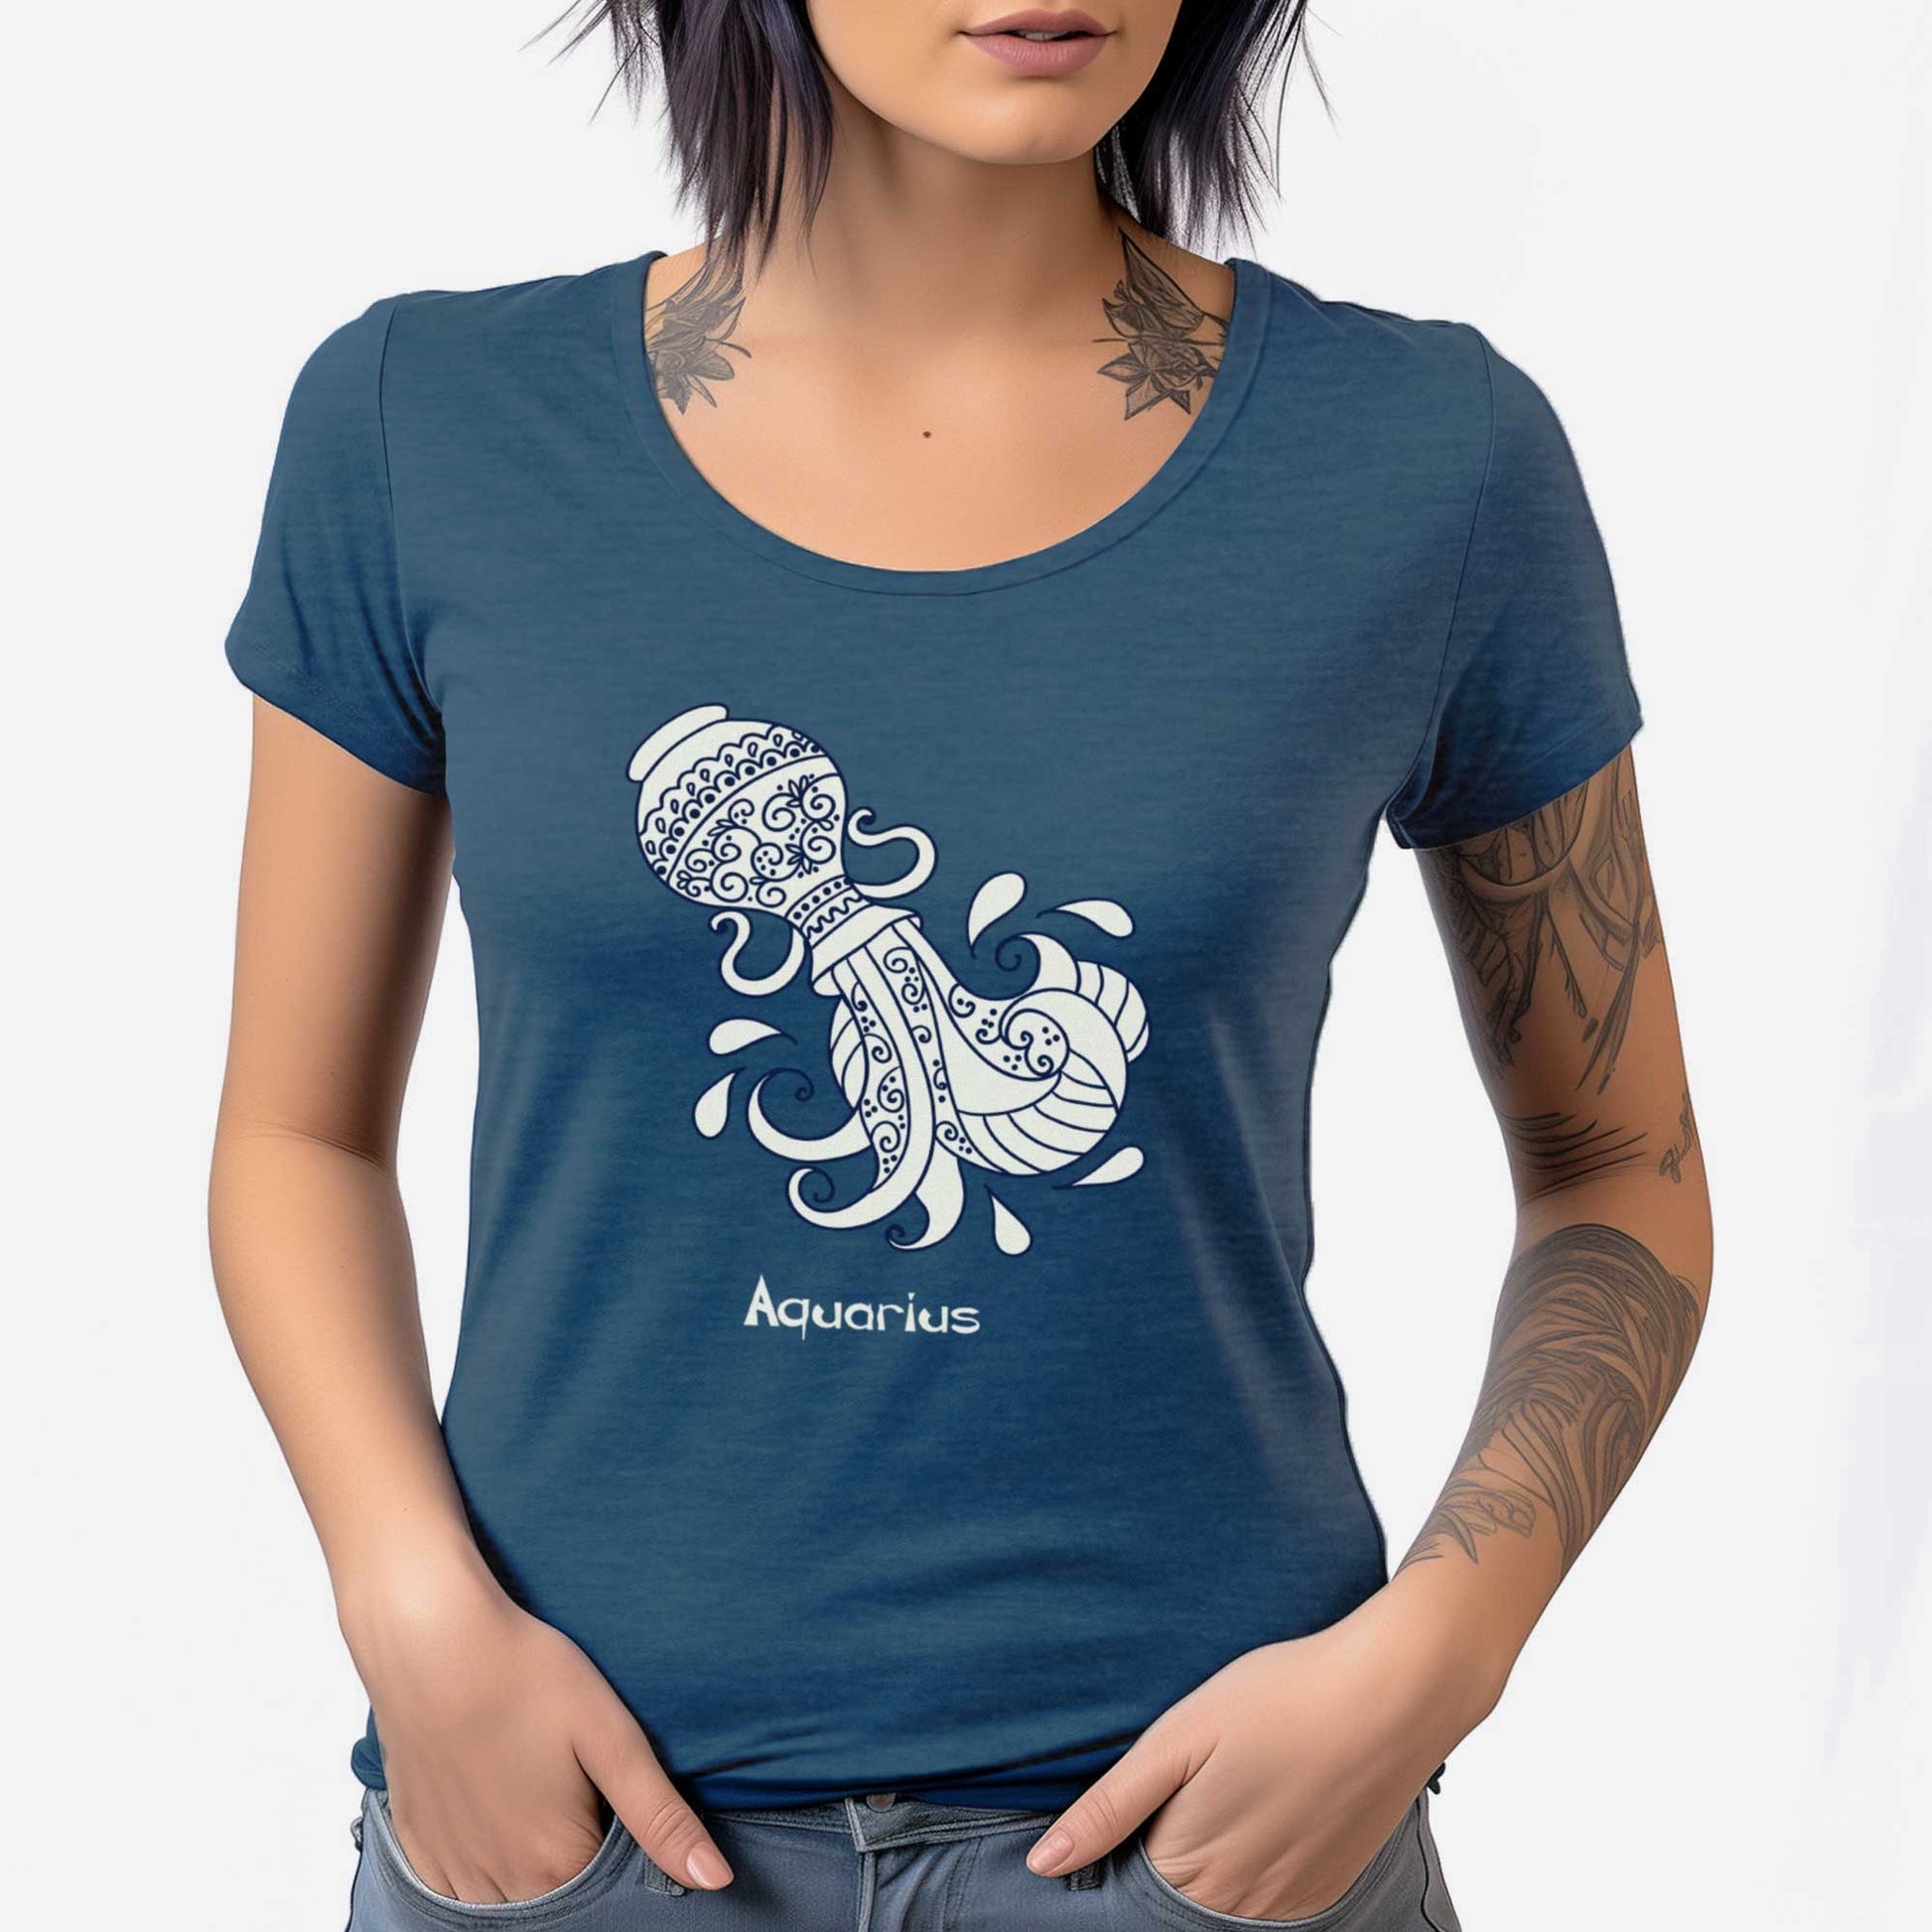 A woman wearing a heathered neptune blue District 7501 scoop neck t-shirt featuring the zodiac symbol of Aquarius, a water jug, in a Mediterranean style.